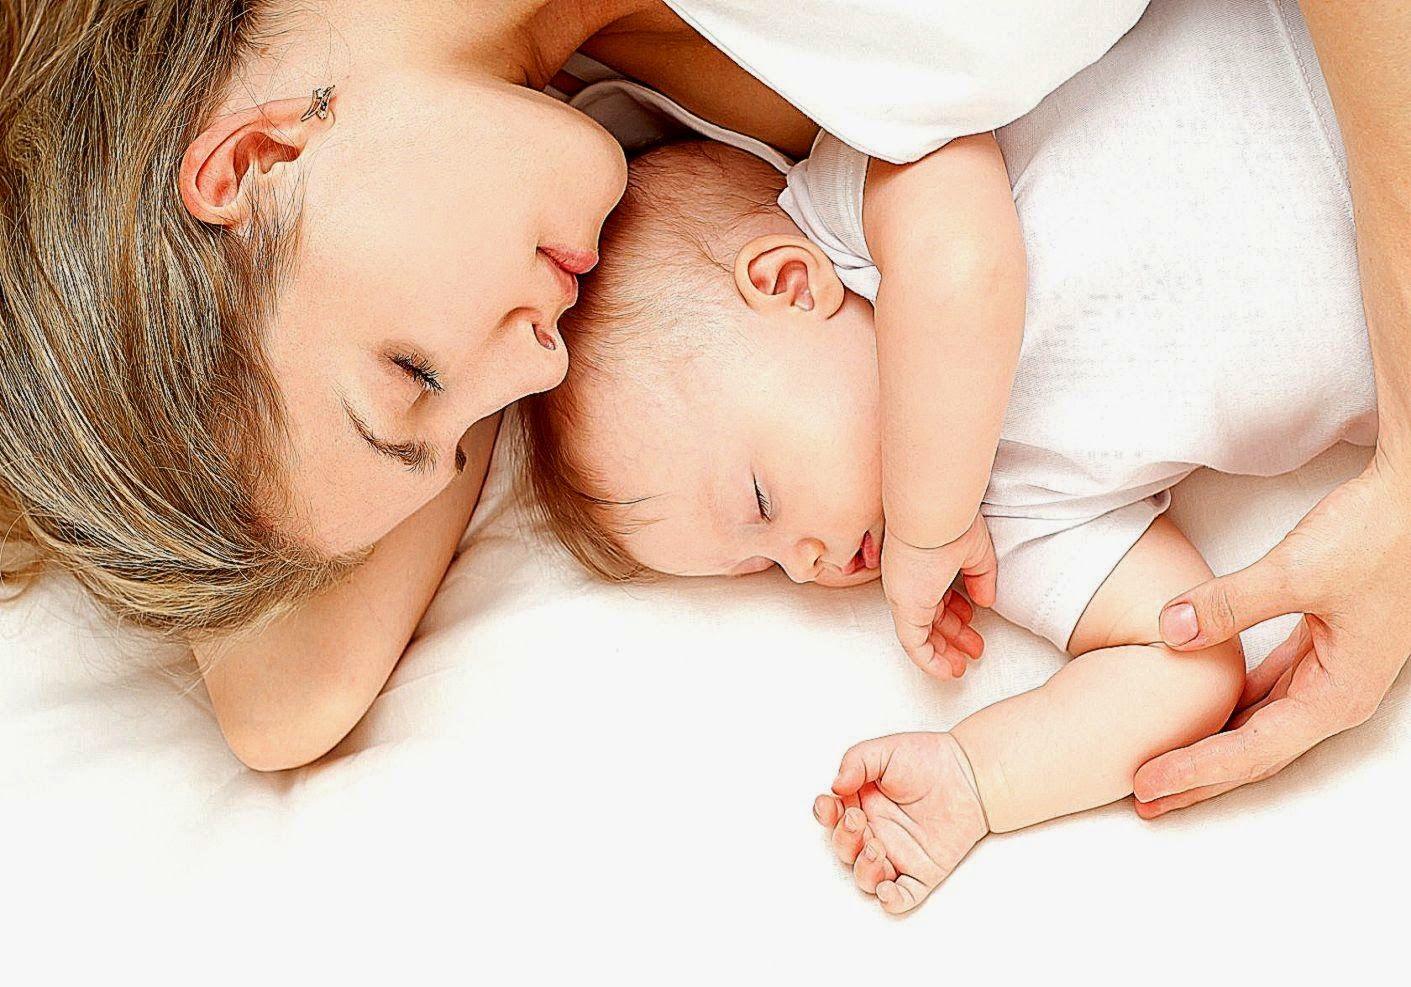 Baby Sleep With Mother Wallpapers Hd.